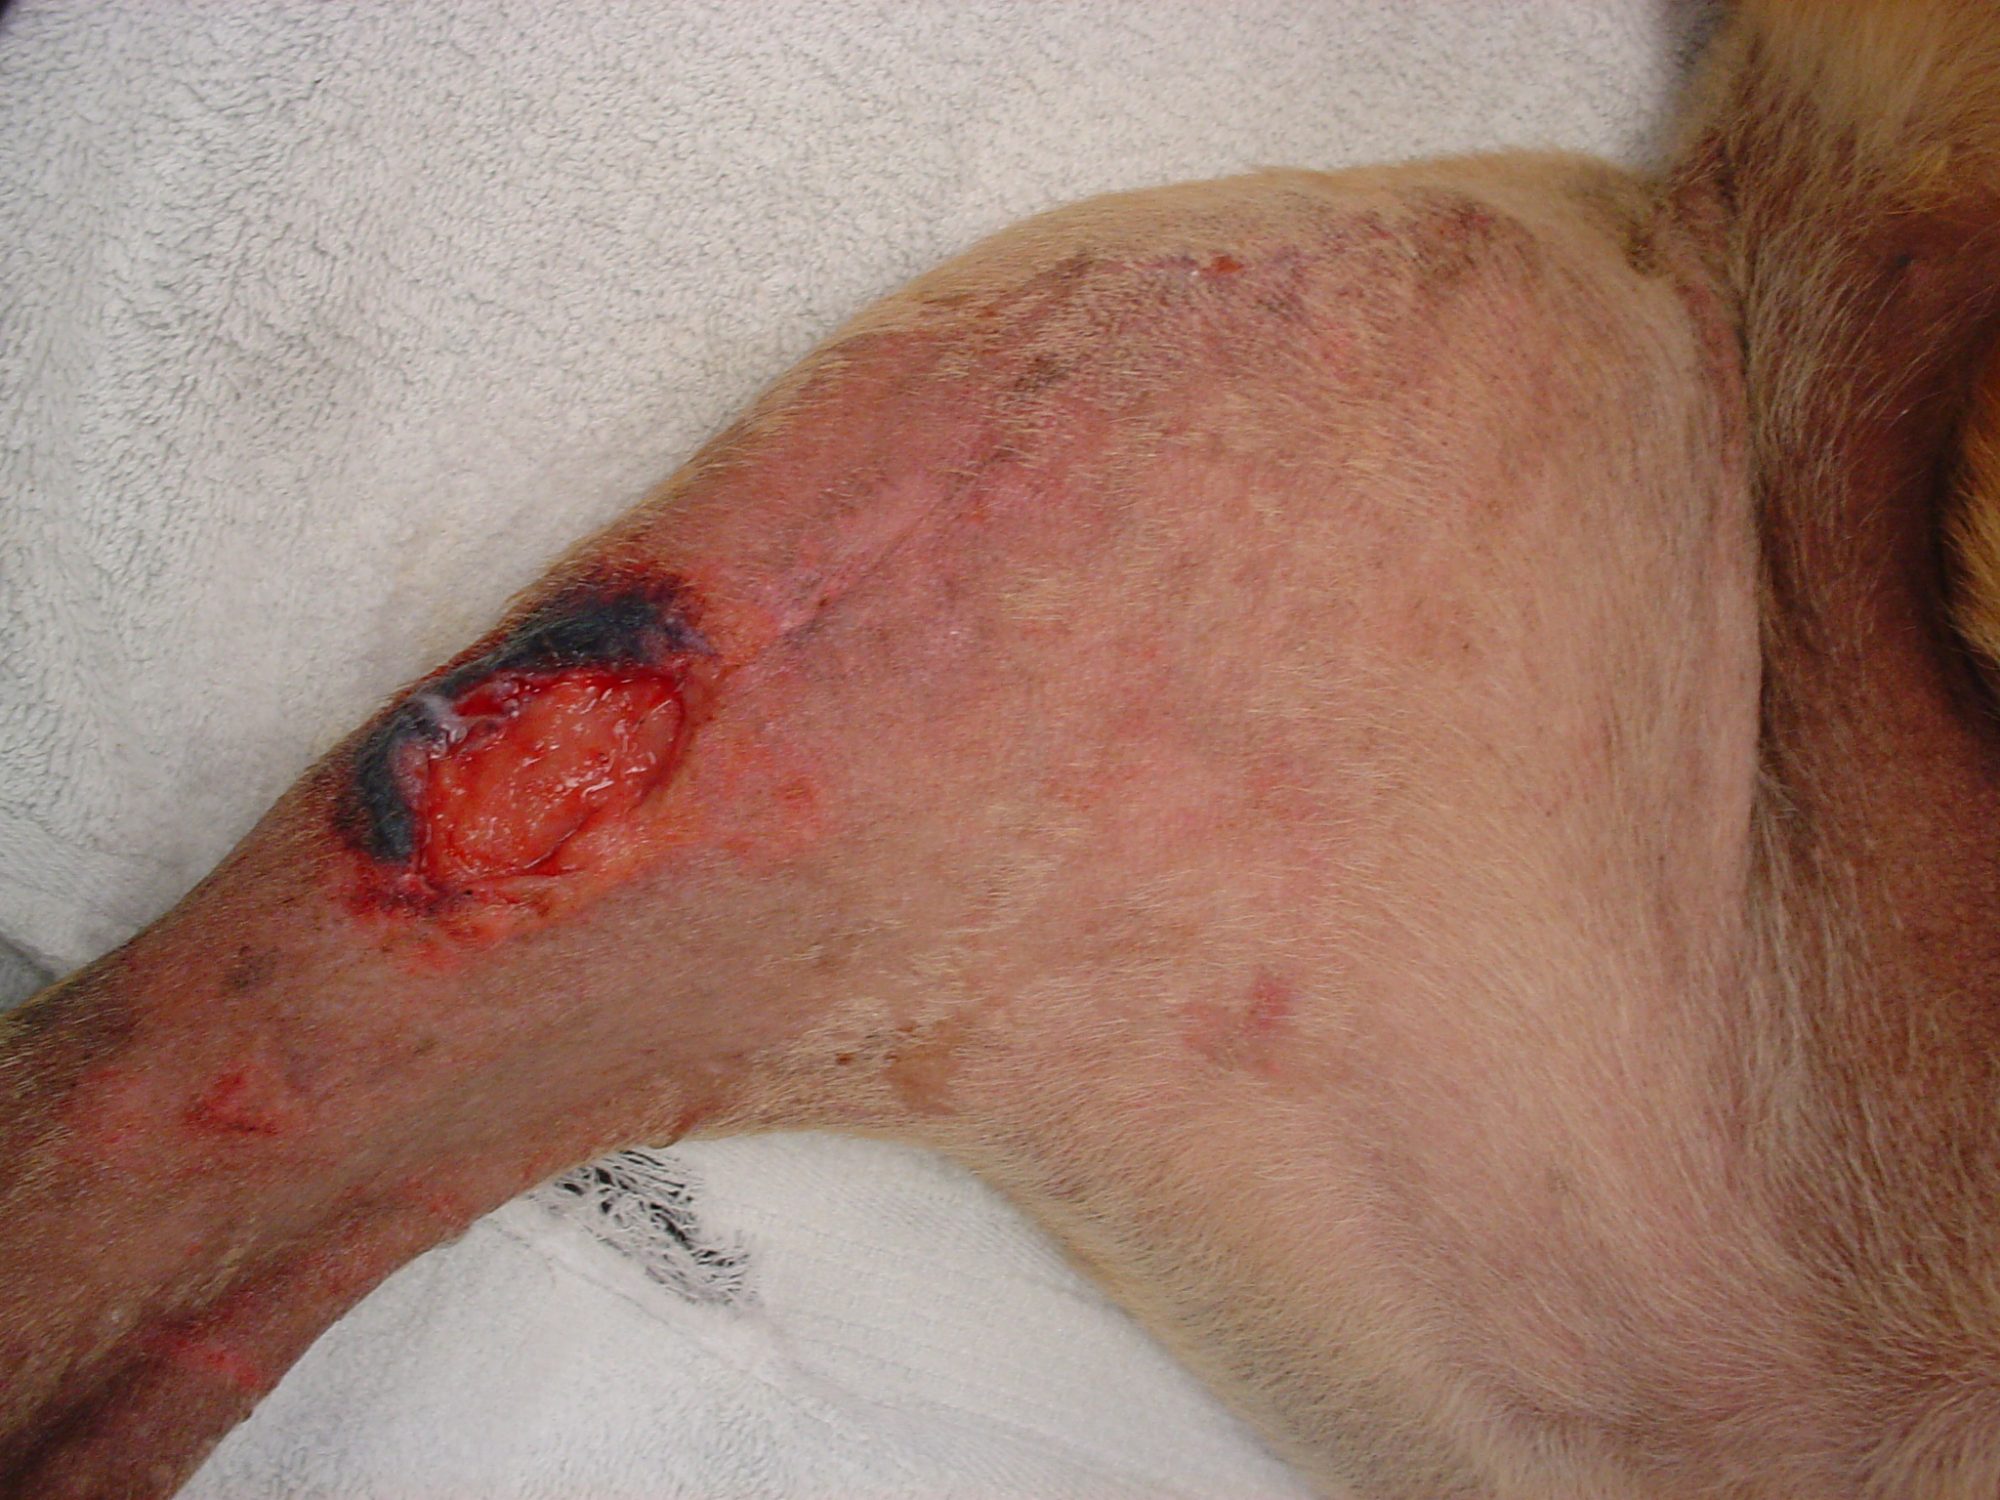 An incision that has reopened